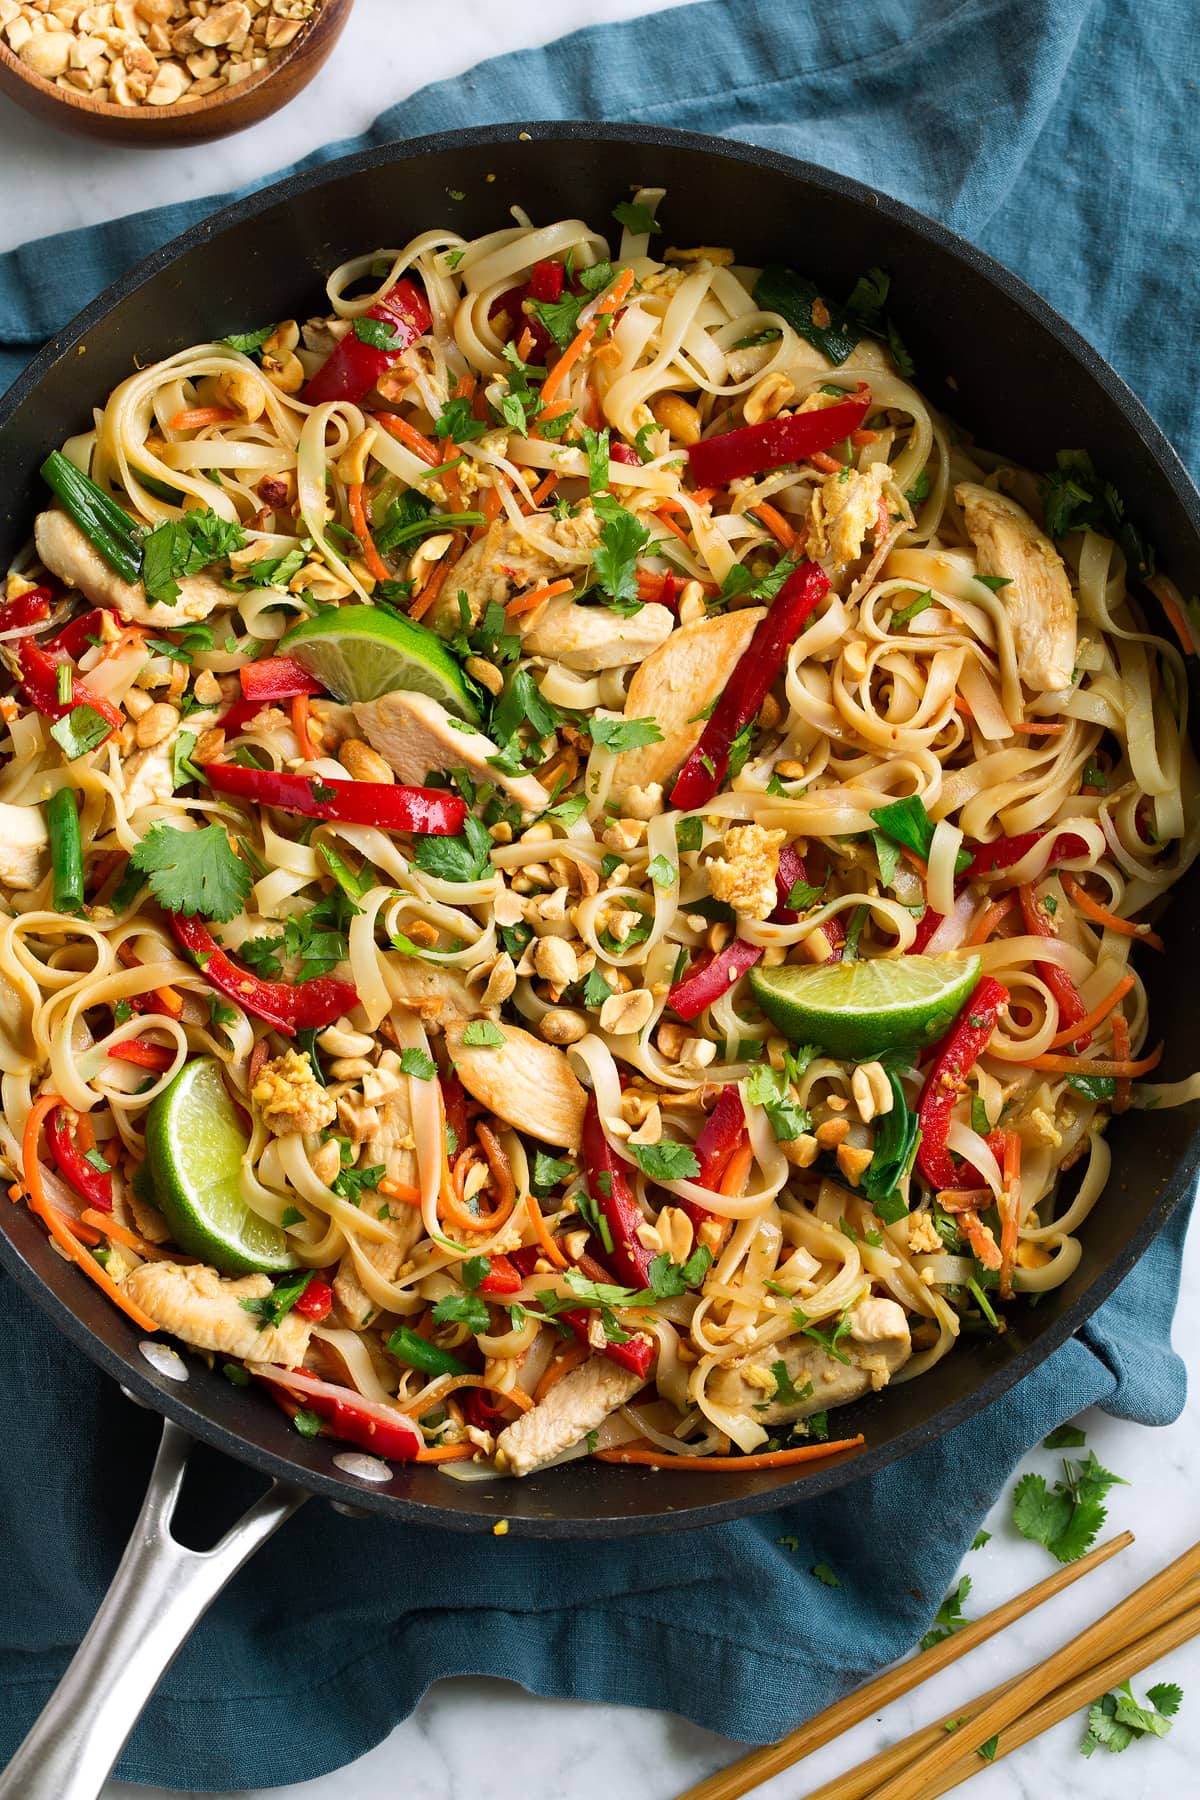 Pad Thai in a black wok with chicken and fresh vegetables.